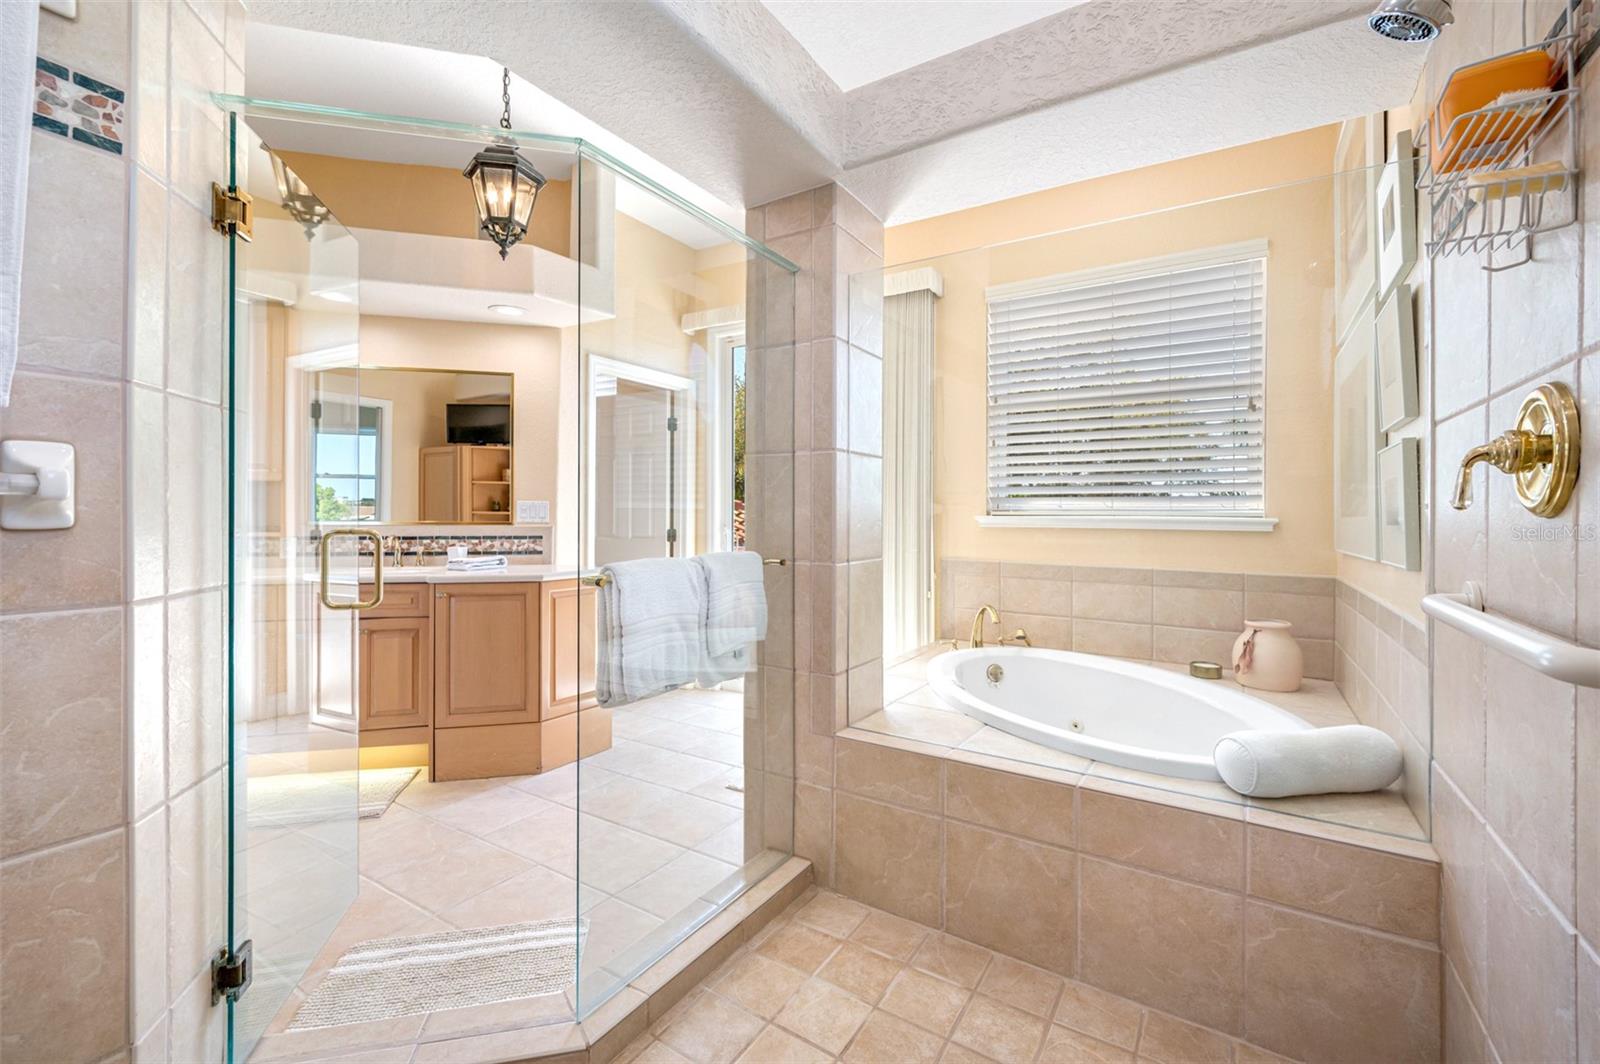 Walk in shower area and jetted soaking tub in primary bath